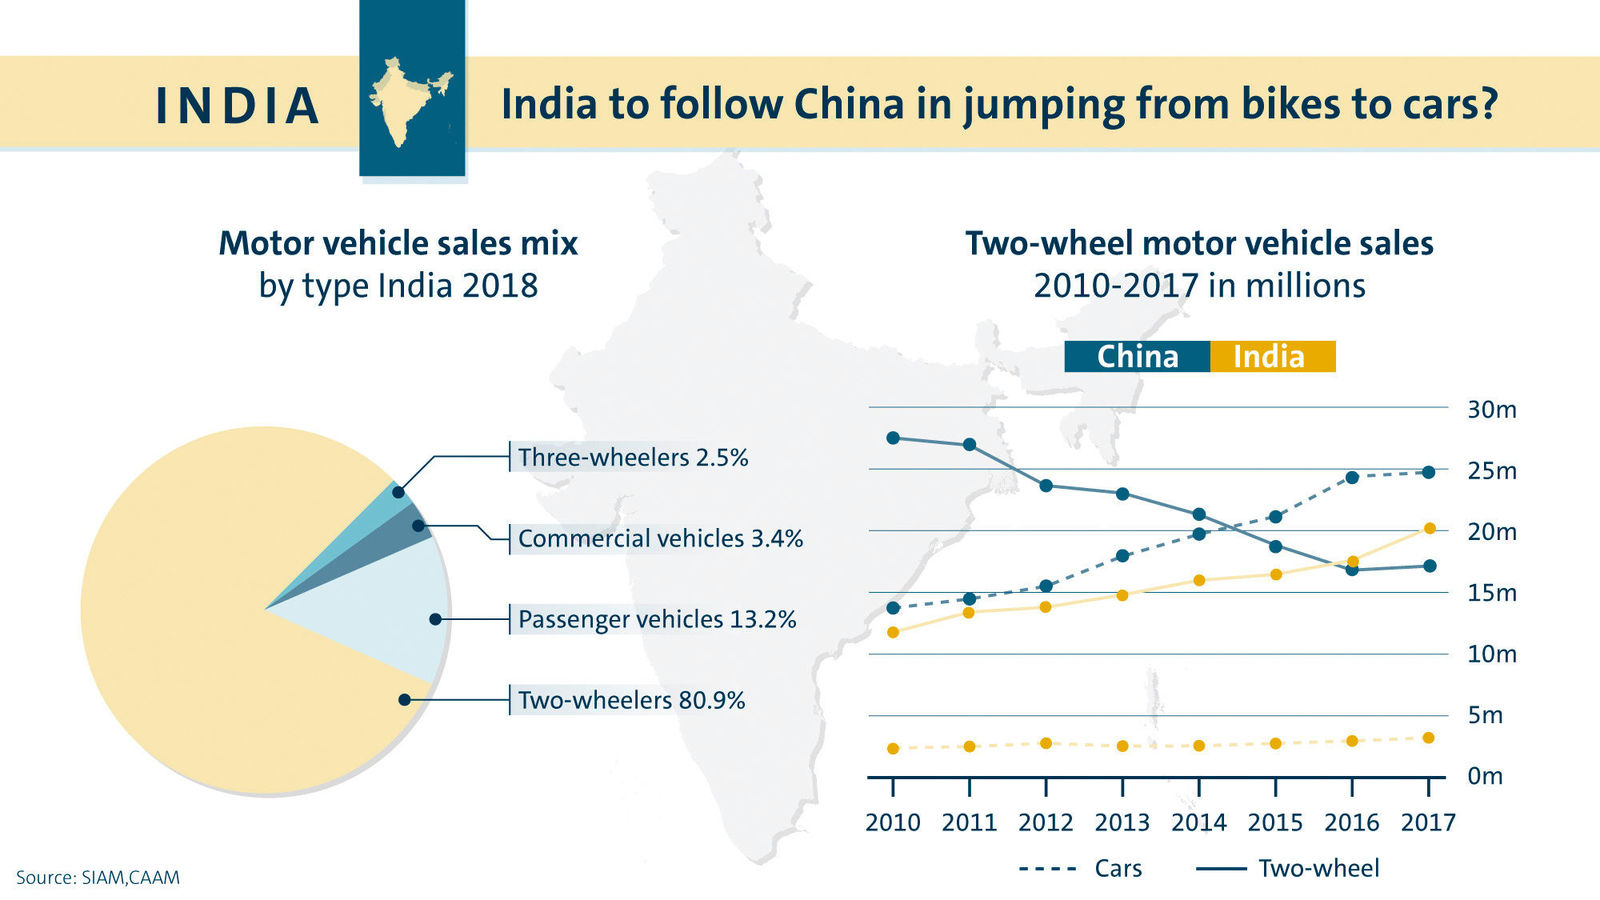 India: From moped to car nation?